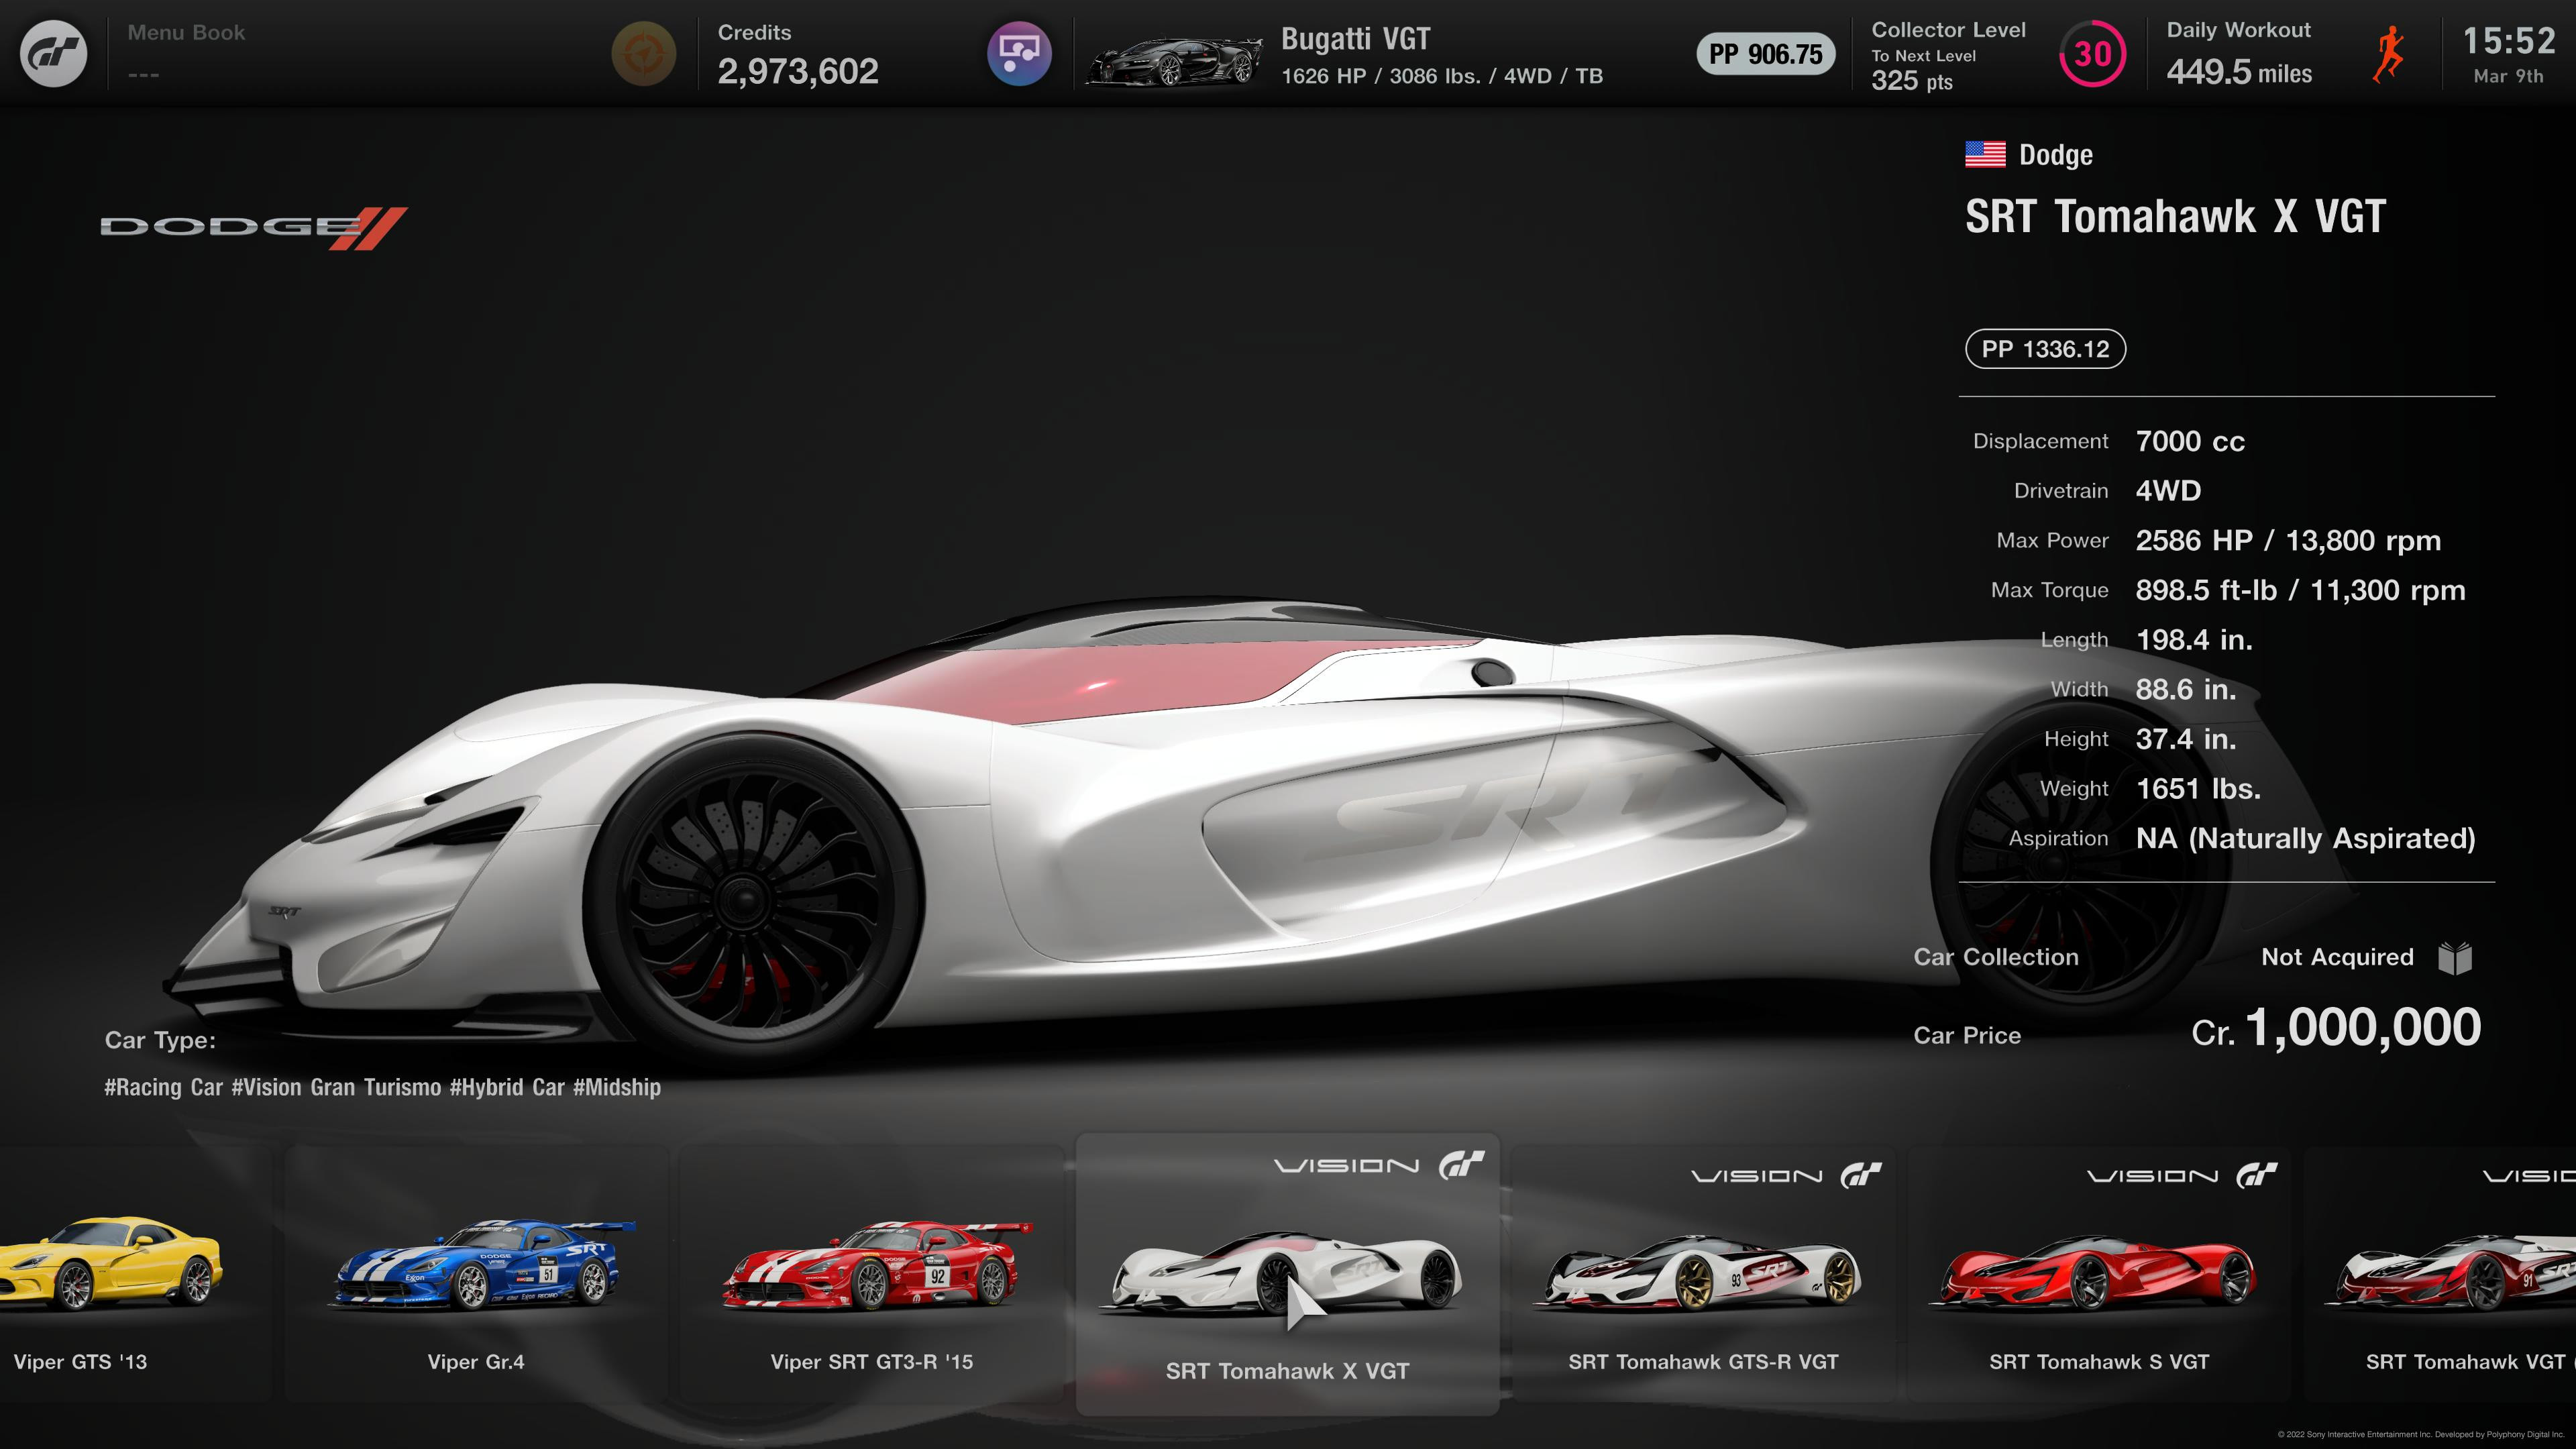 How to obtain Gran Turismo 7's Three Legendary Cars Trophy